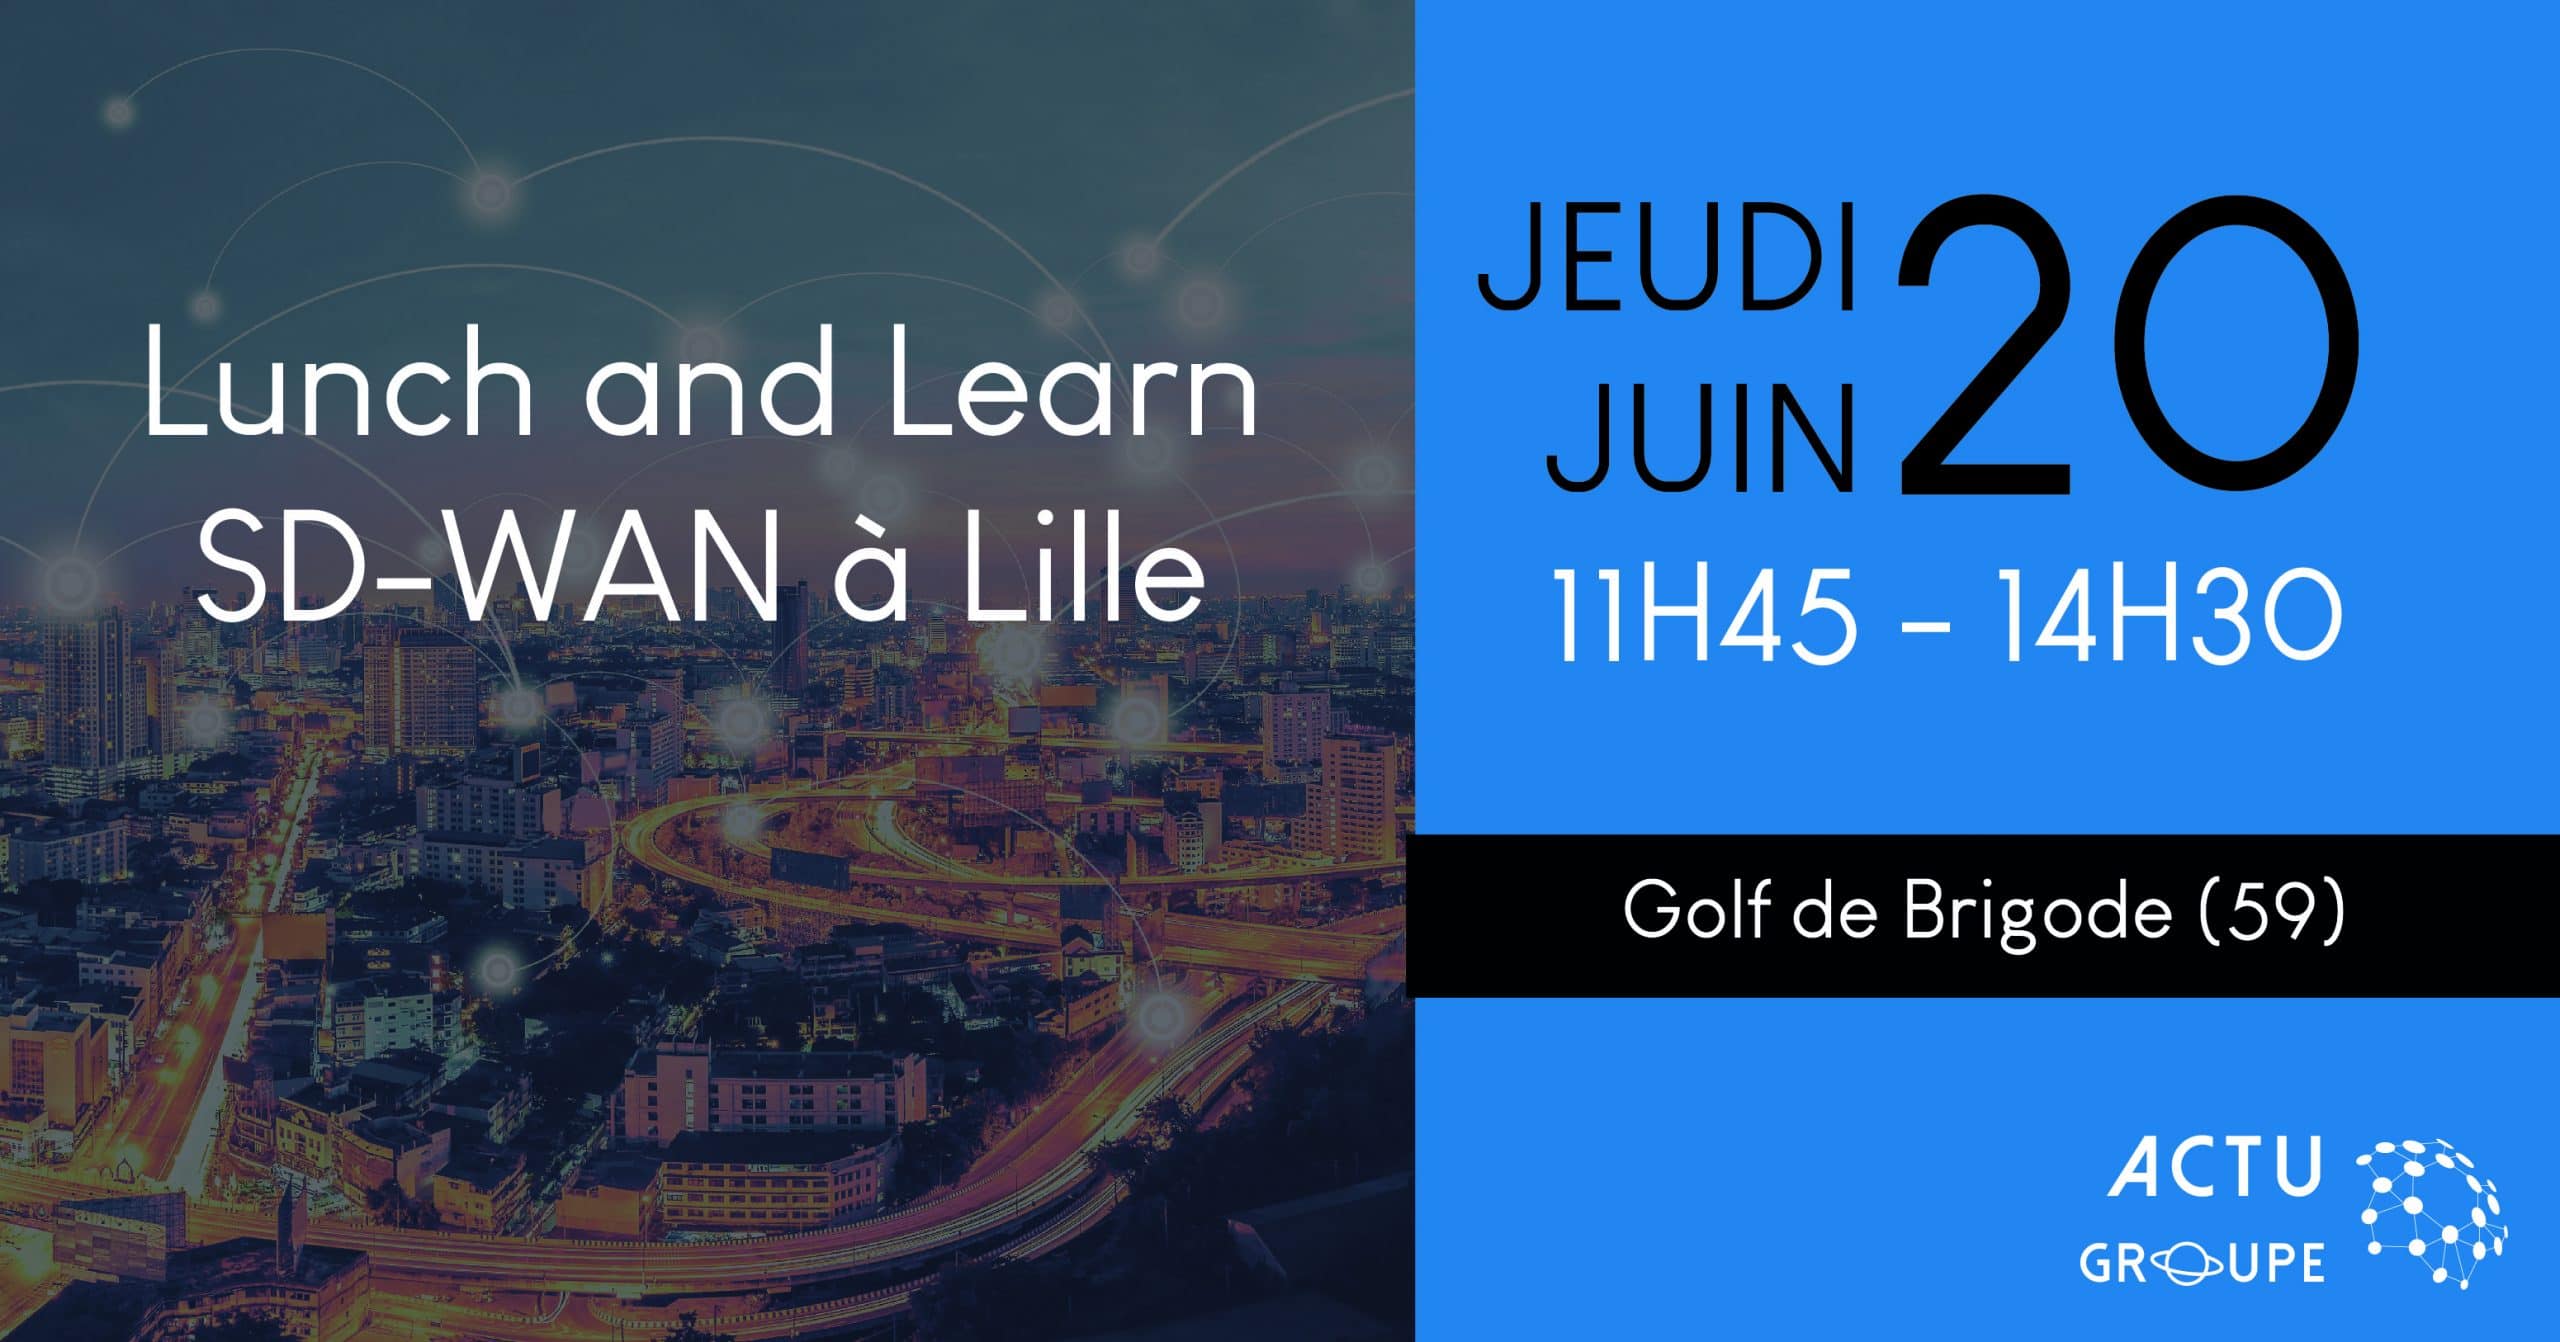 lunch_and_learn_sdwan_actu_groupe-